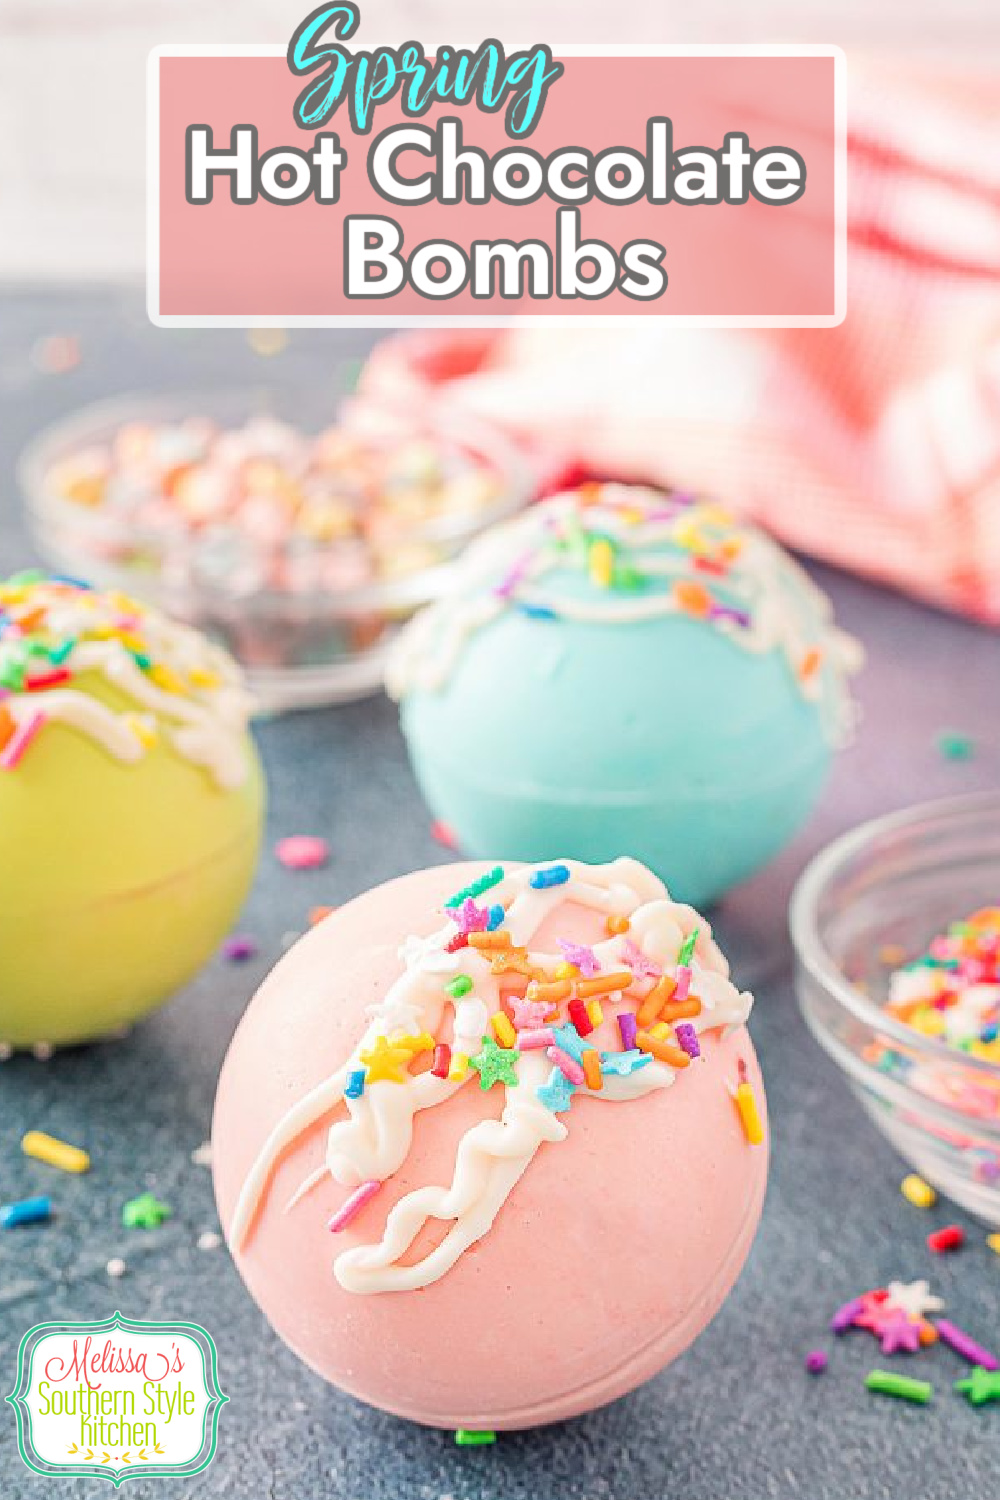 Add these bright and colorful Spring Hot Chocolate bombs to your Easter goodies this year #hotchocolatebombs #easterdesserts #easterbaskets #springdesserts #hotcocoabombs #easyrecipes #whitechocolate #southernrecipes